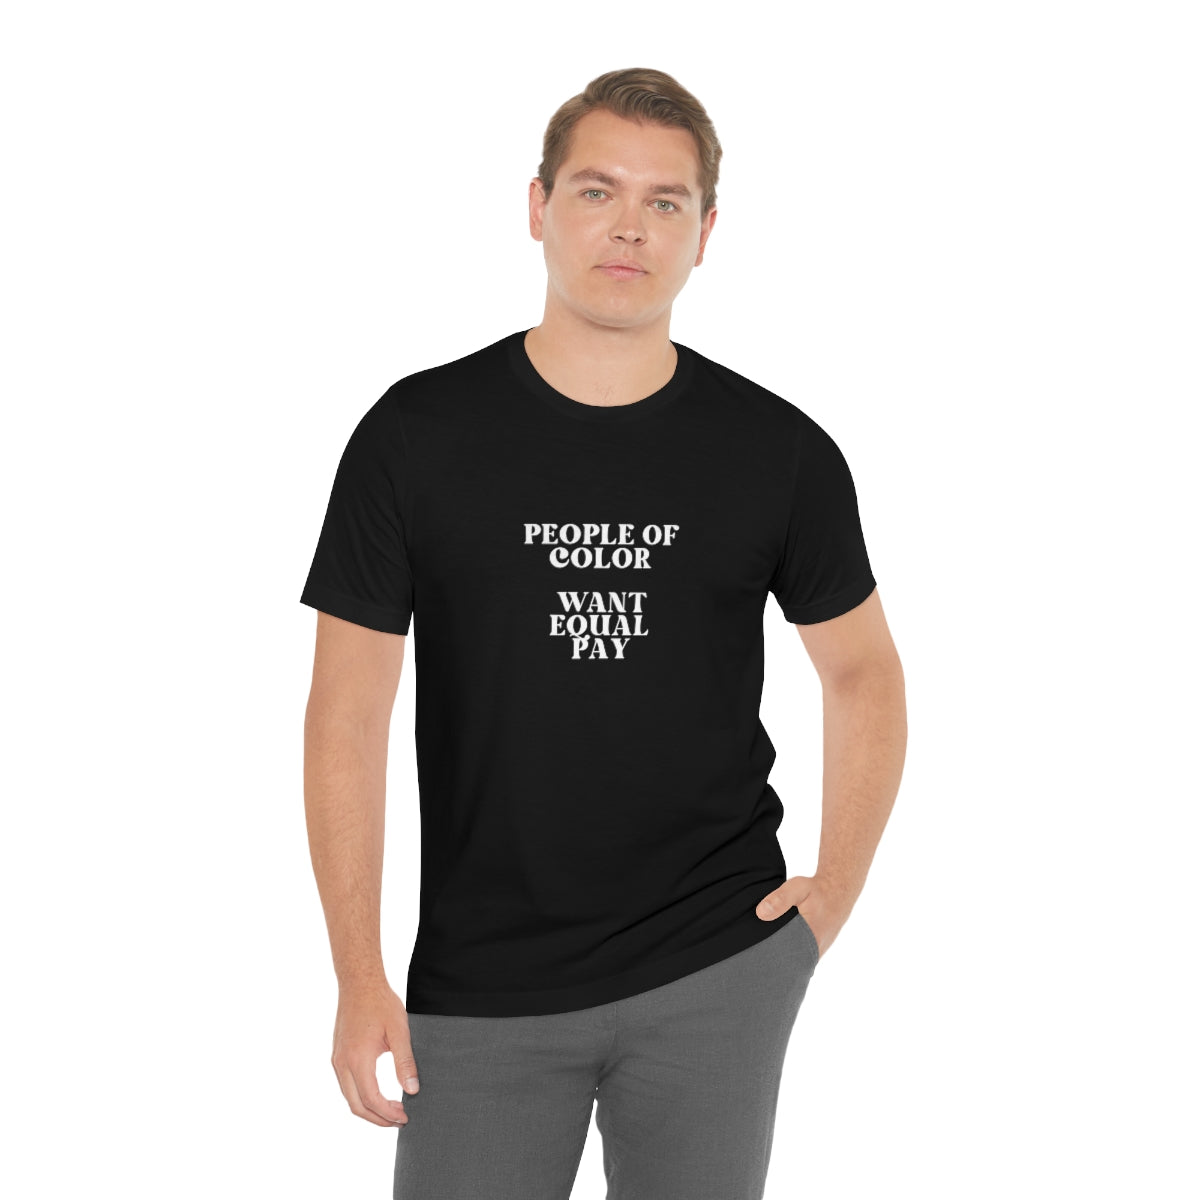 Equal Pay T Shirt, People of Color Want Equal Pay Statement Tees, Equality Tees, Equality, Diversity, Equity, Inclusion Tops